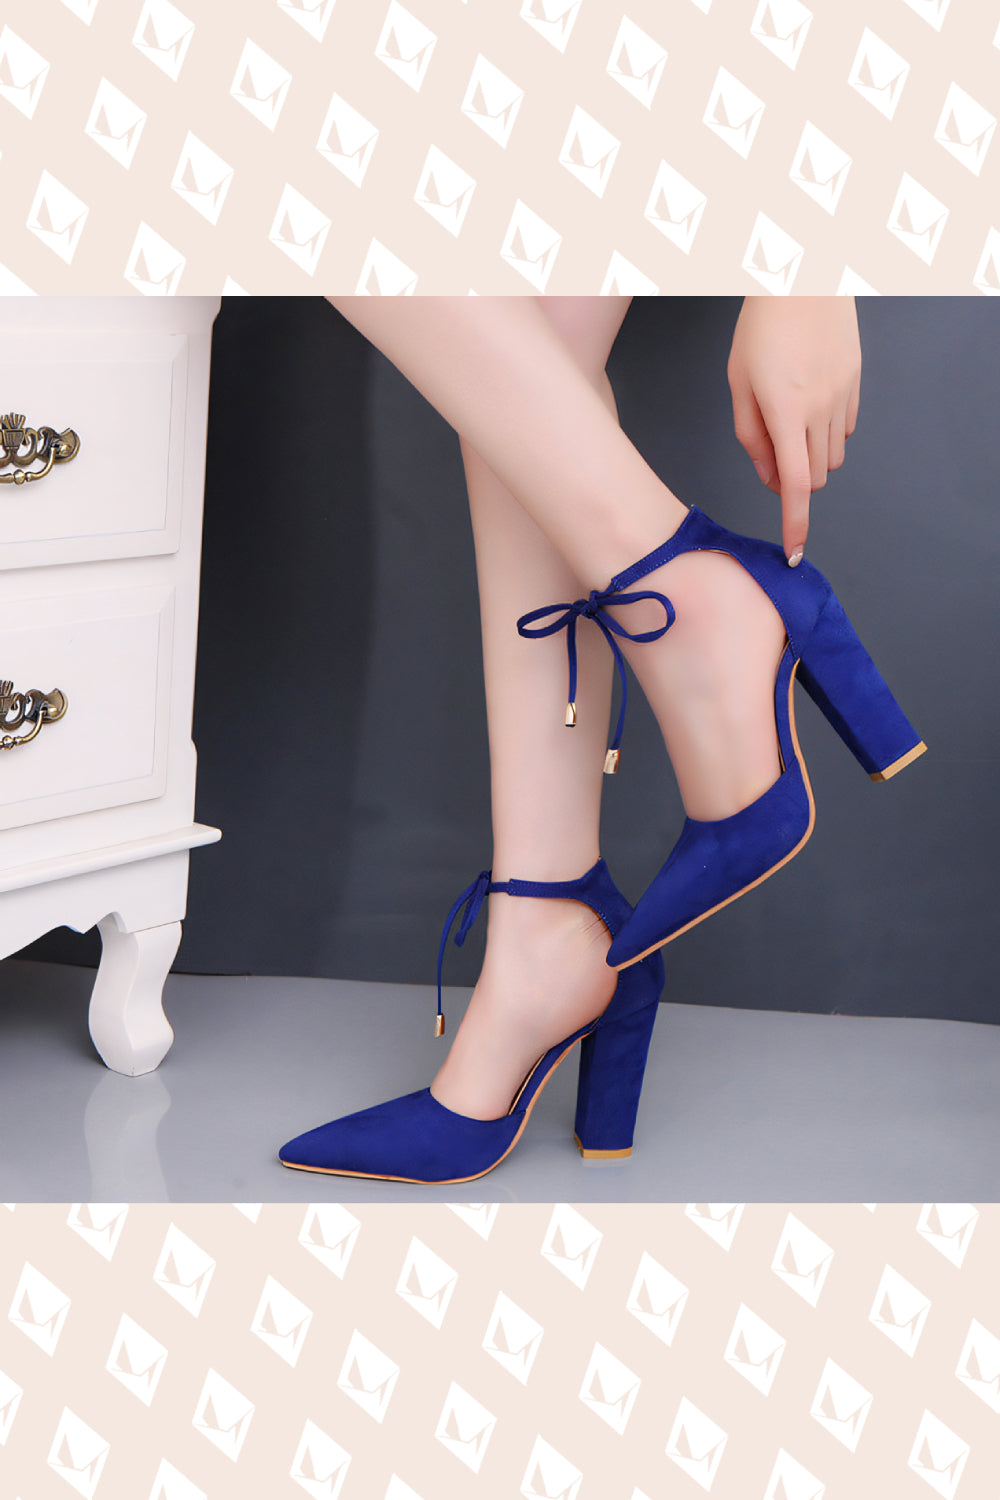 Simply Refined Heels - Blue - Strange Clothes